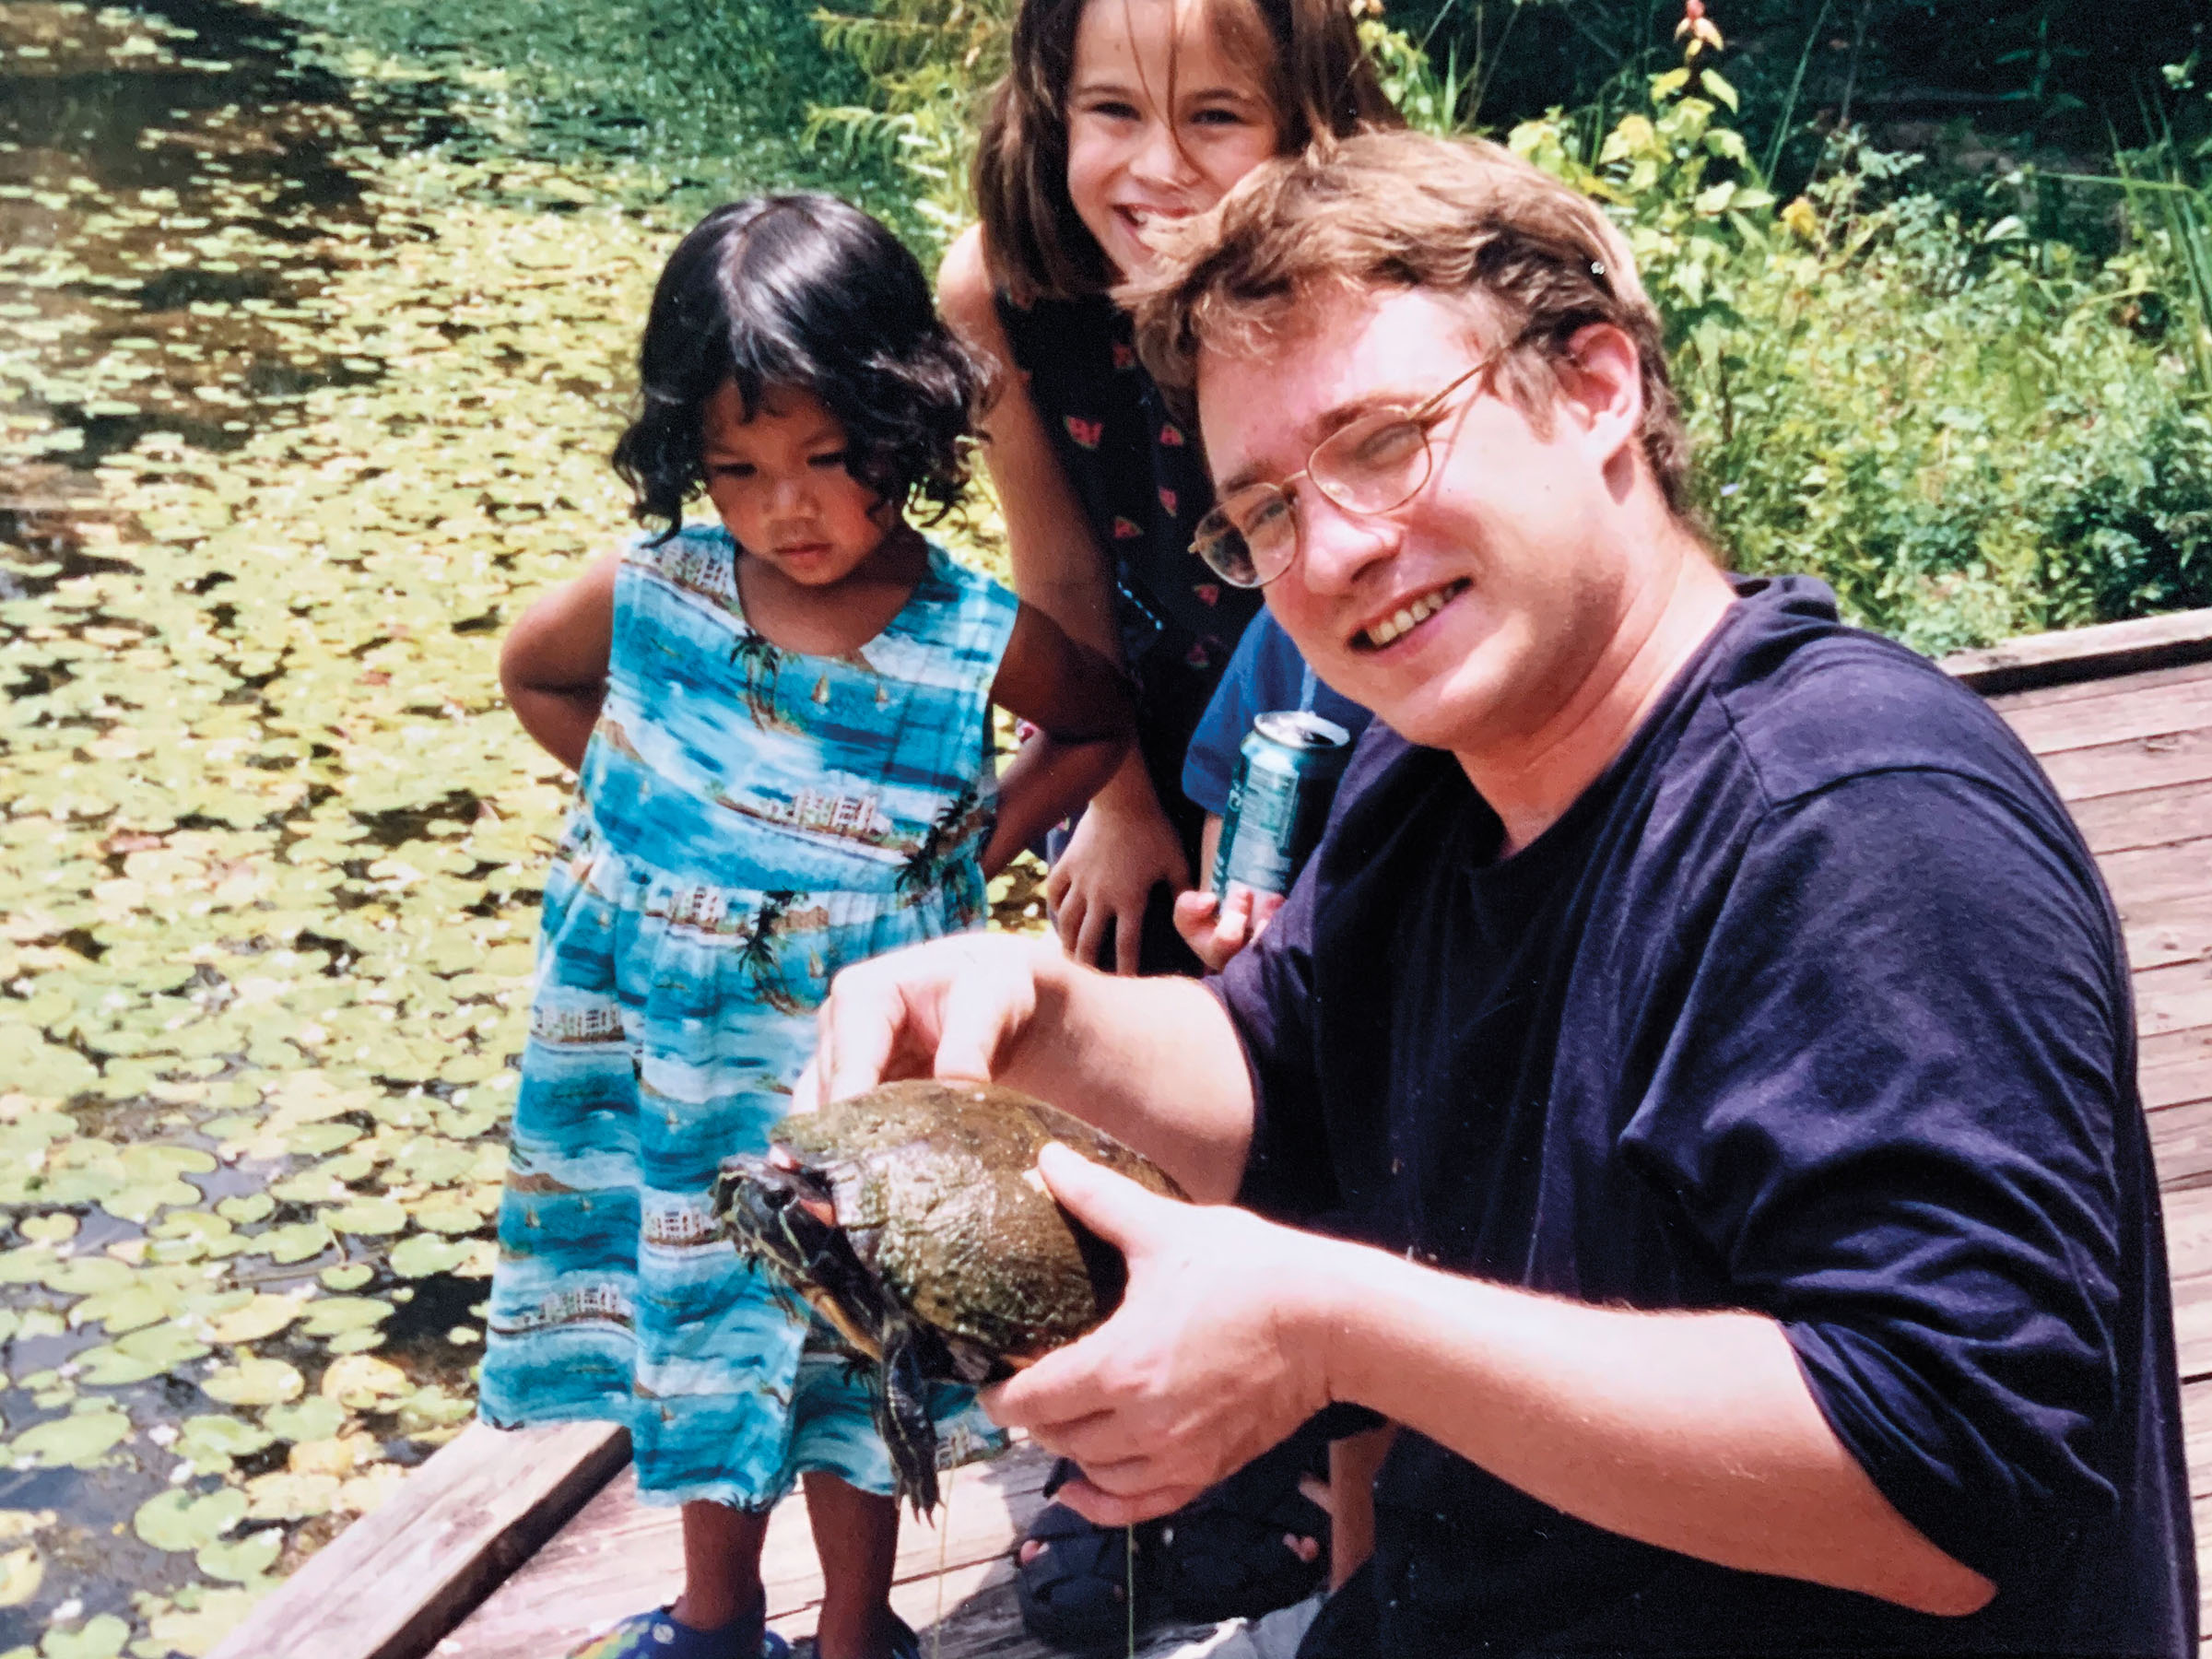 A man in a blue shirt holds a turtle in front of two young children